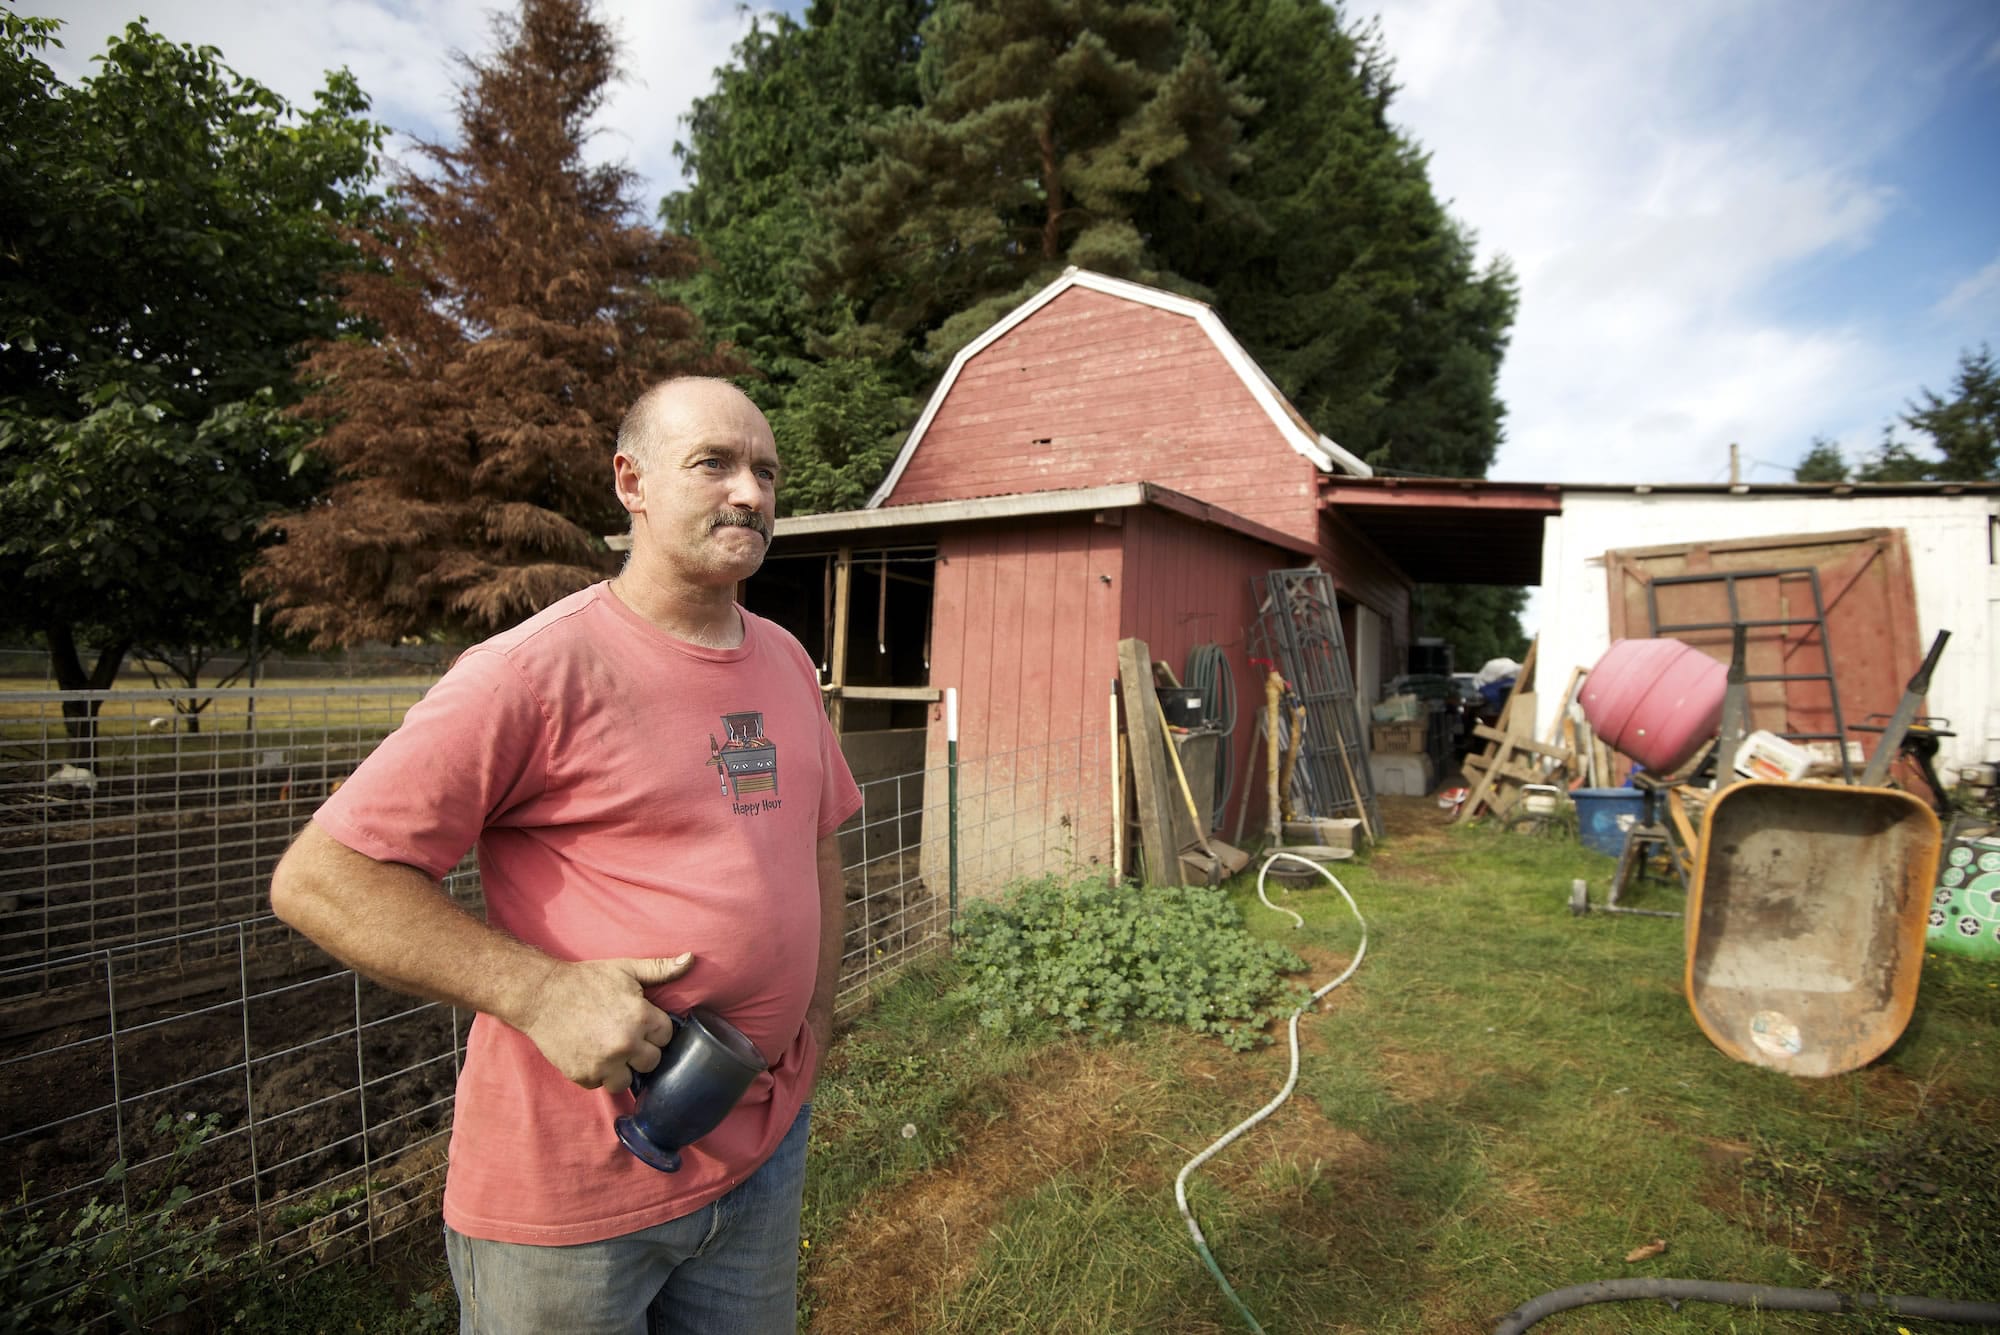 Hazel Dell: Gerry LaDuke said he had no idea that odors from his urban farm were irritating more than just one nearby complainant. He said he wants to make sure his neighbors' concerns are addressed so they and his farm can coexist in peace.